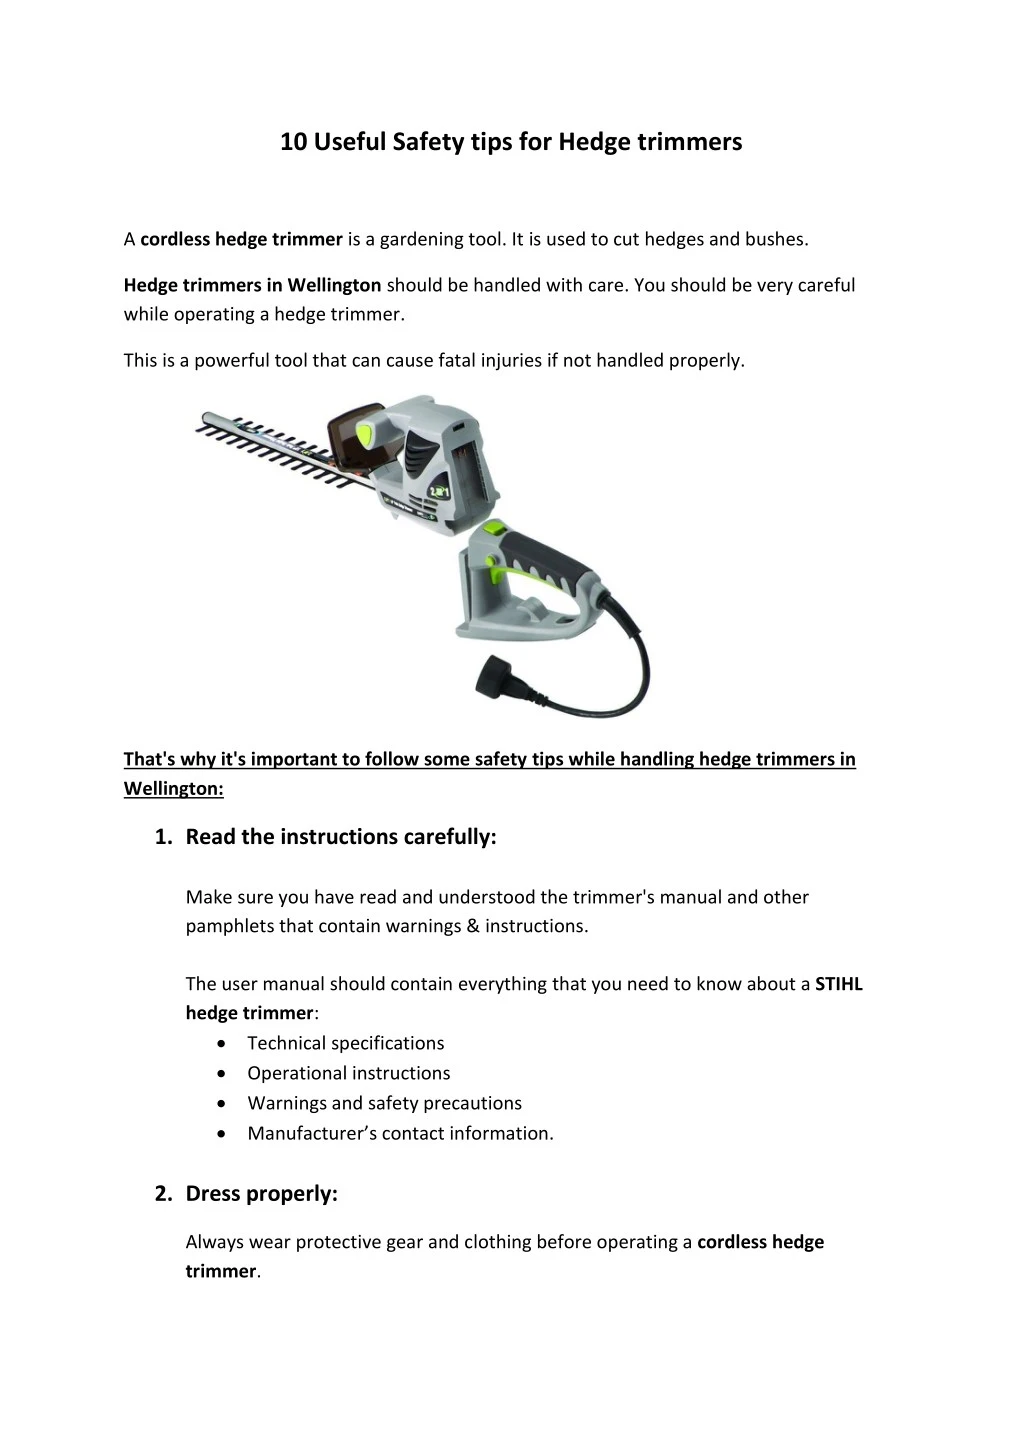 10 useful safety tips for hedge trimmers